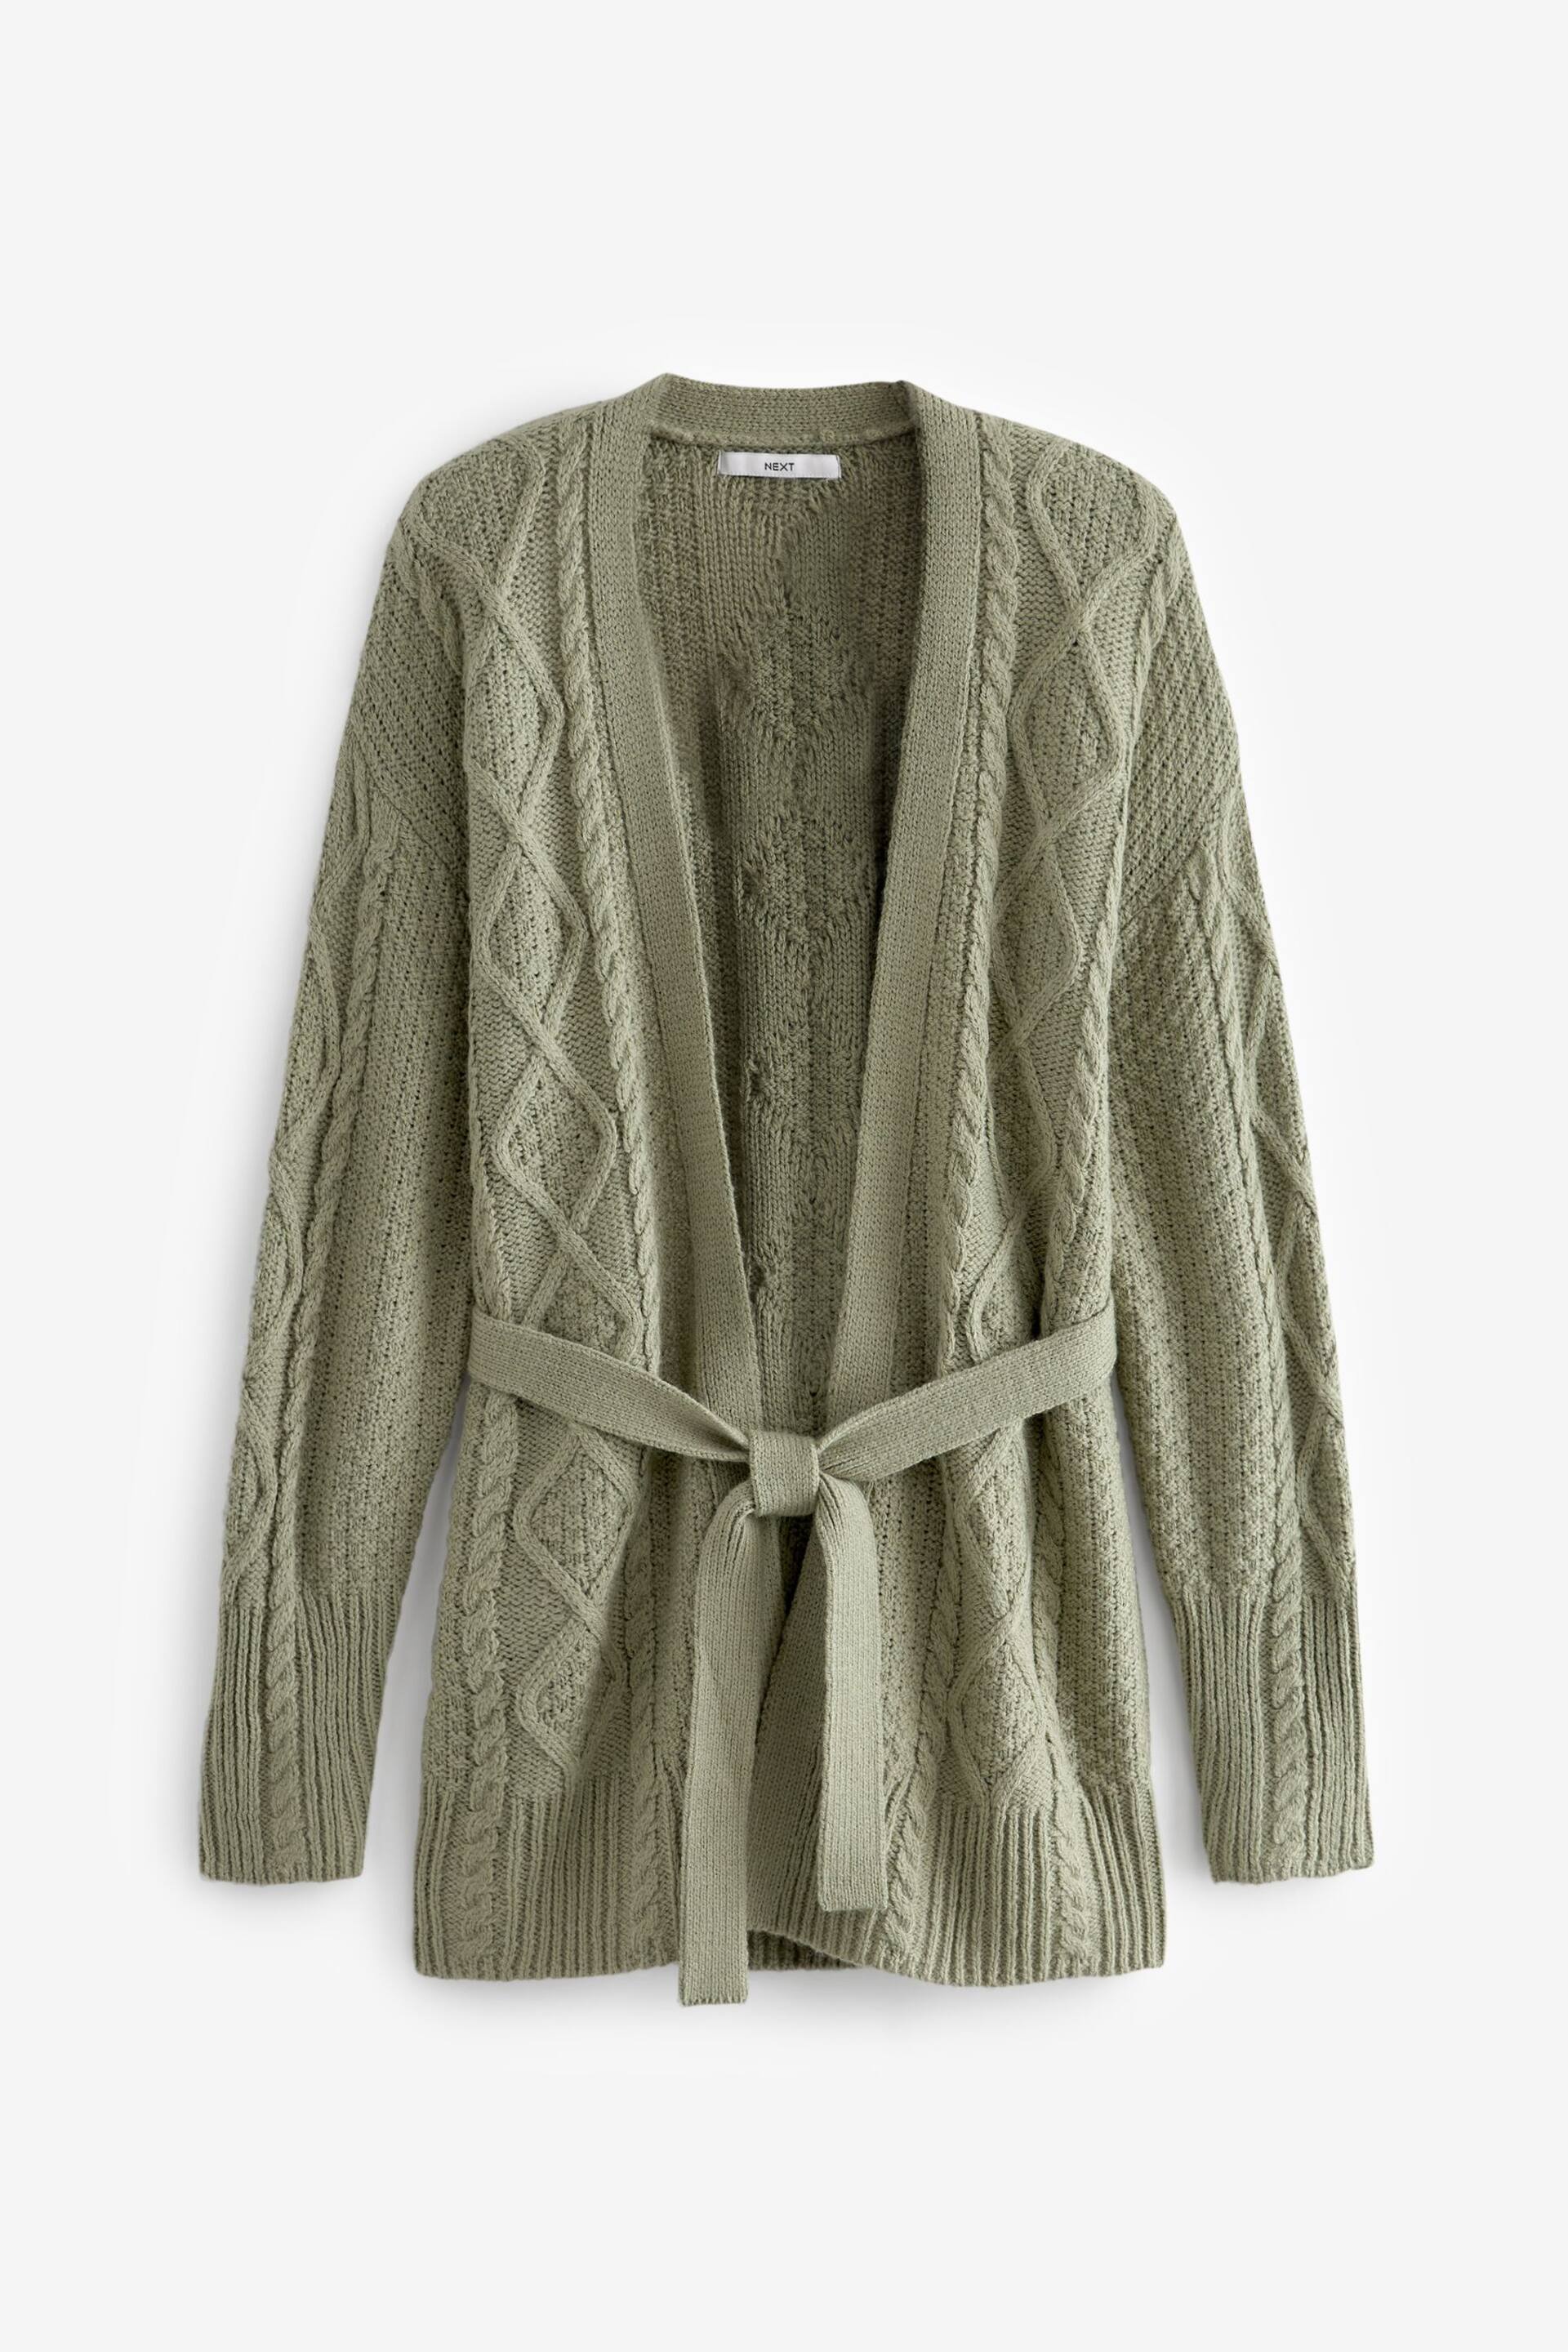 Sage Green Cable Belt Cardigan - Image 5 of 6